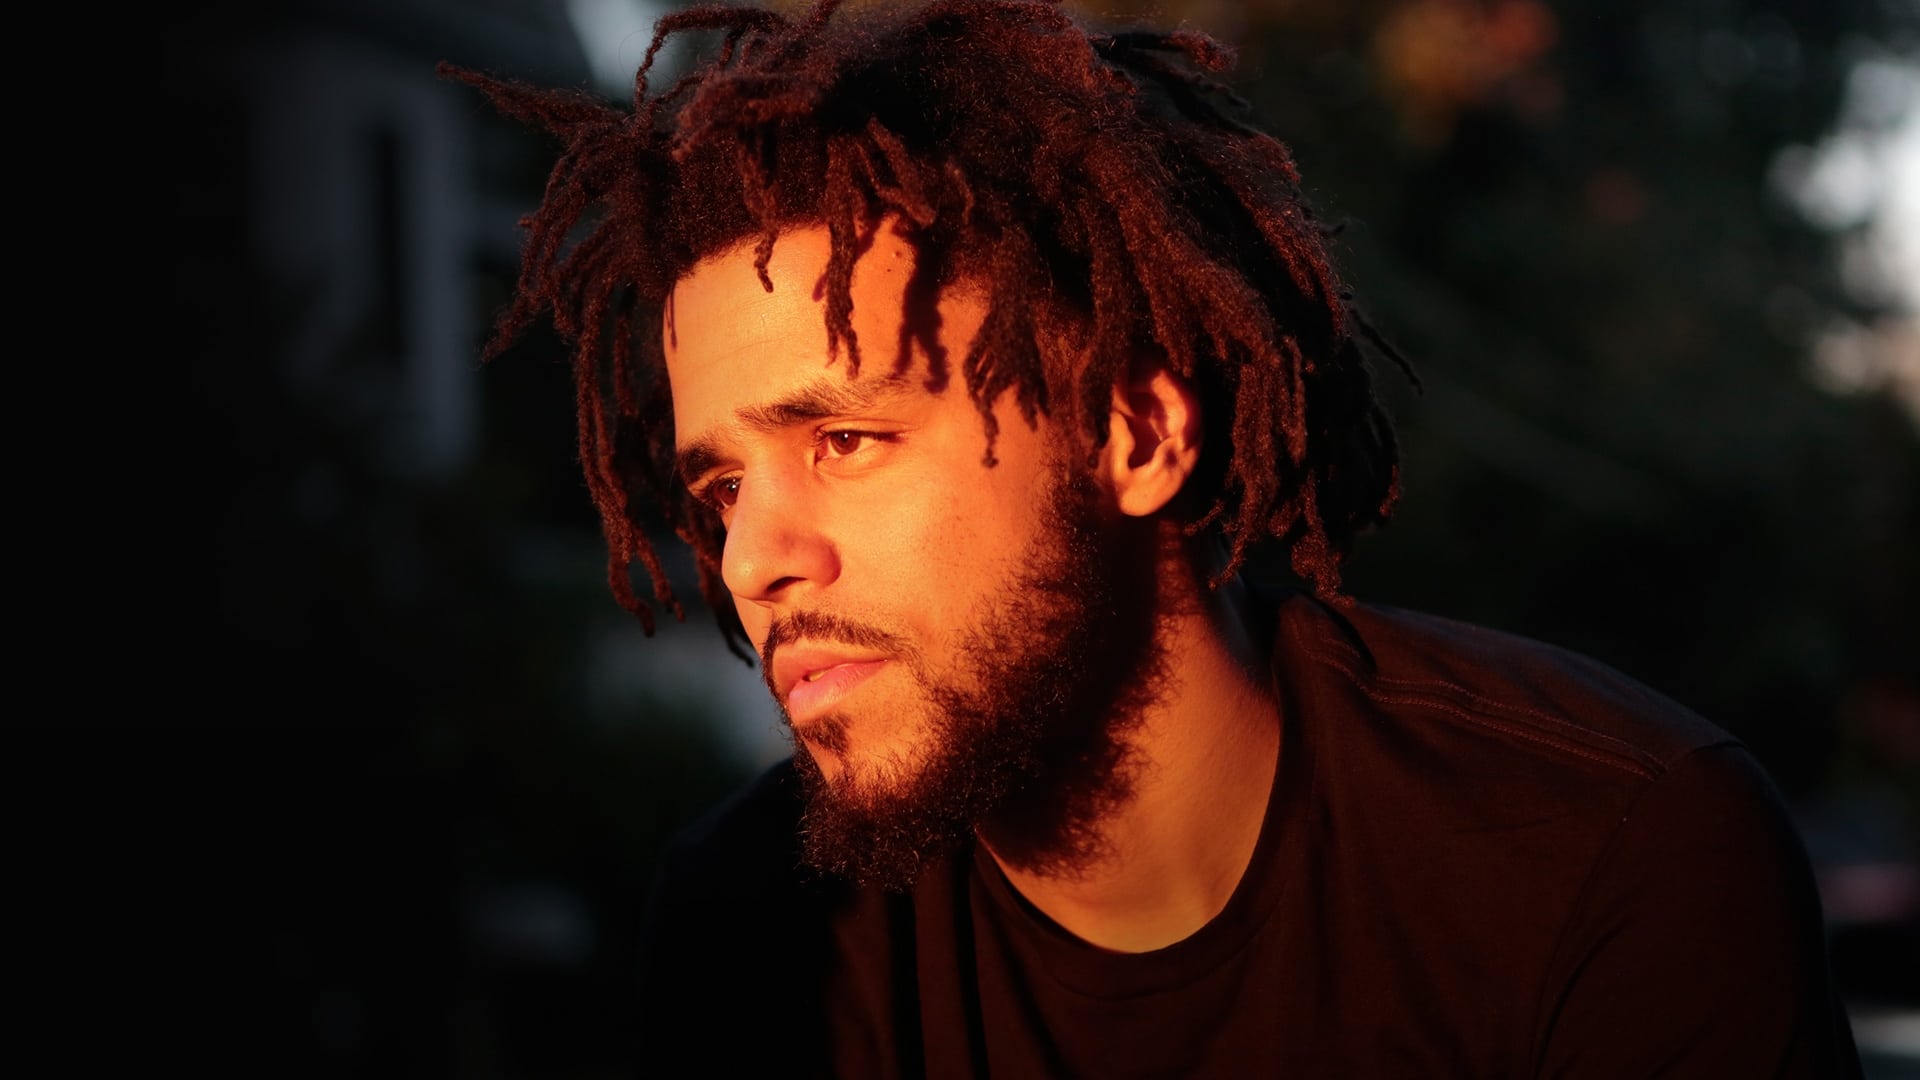 J Cole 4 Your Eyez Only Mp3 Download - dwnloadcasual